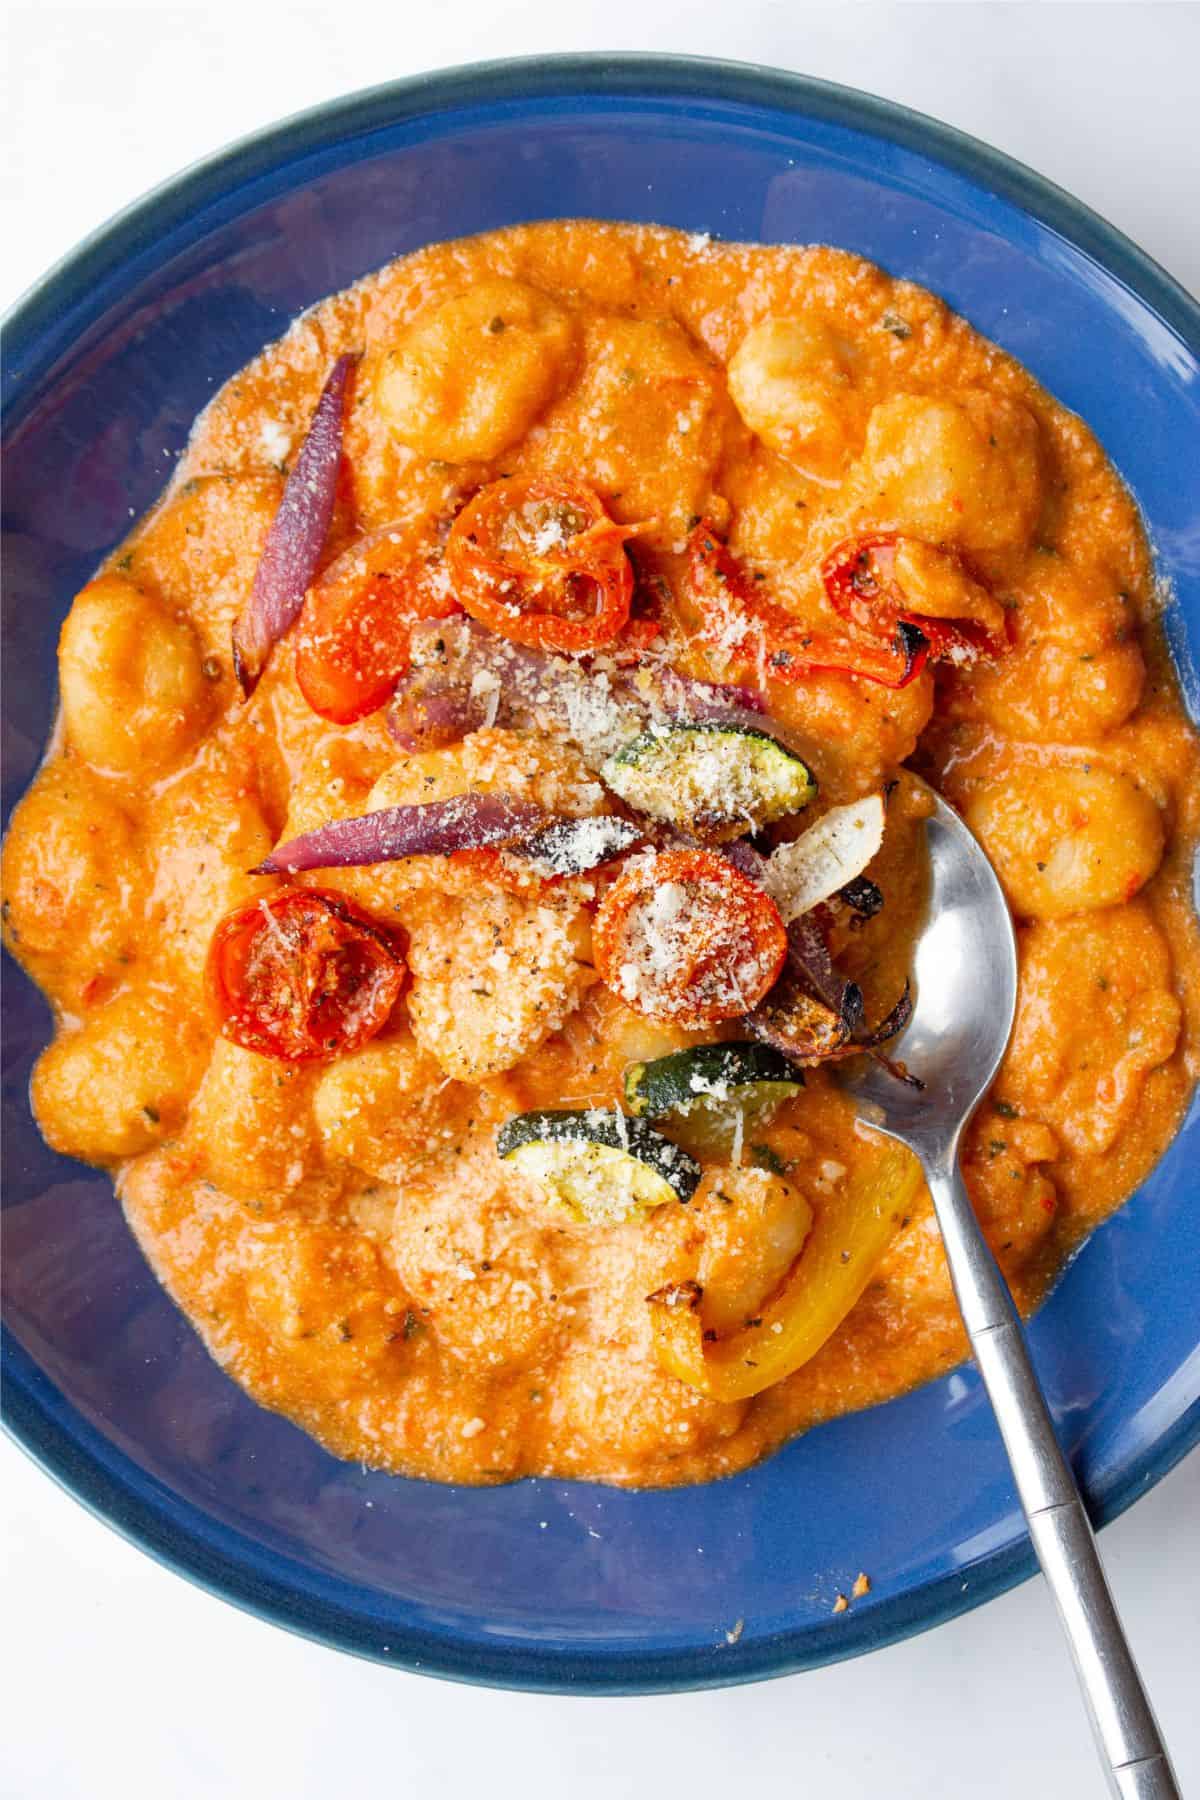 A bowl of gnocchi with creamy tomato sauce, roasted vegetables and parmesan with a metal spoon in a blue bowl.